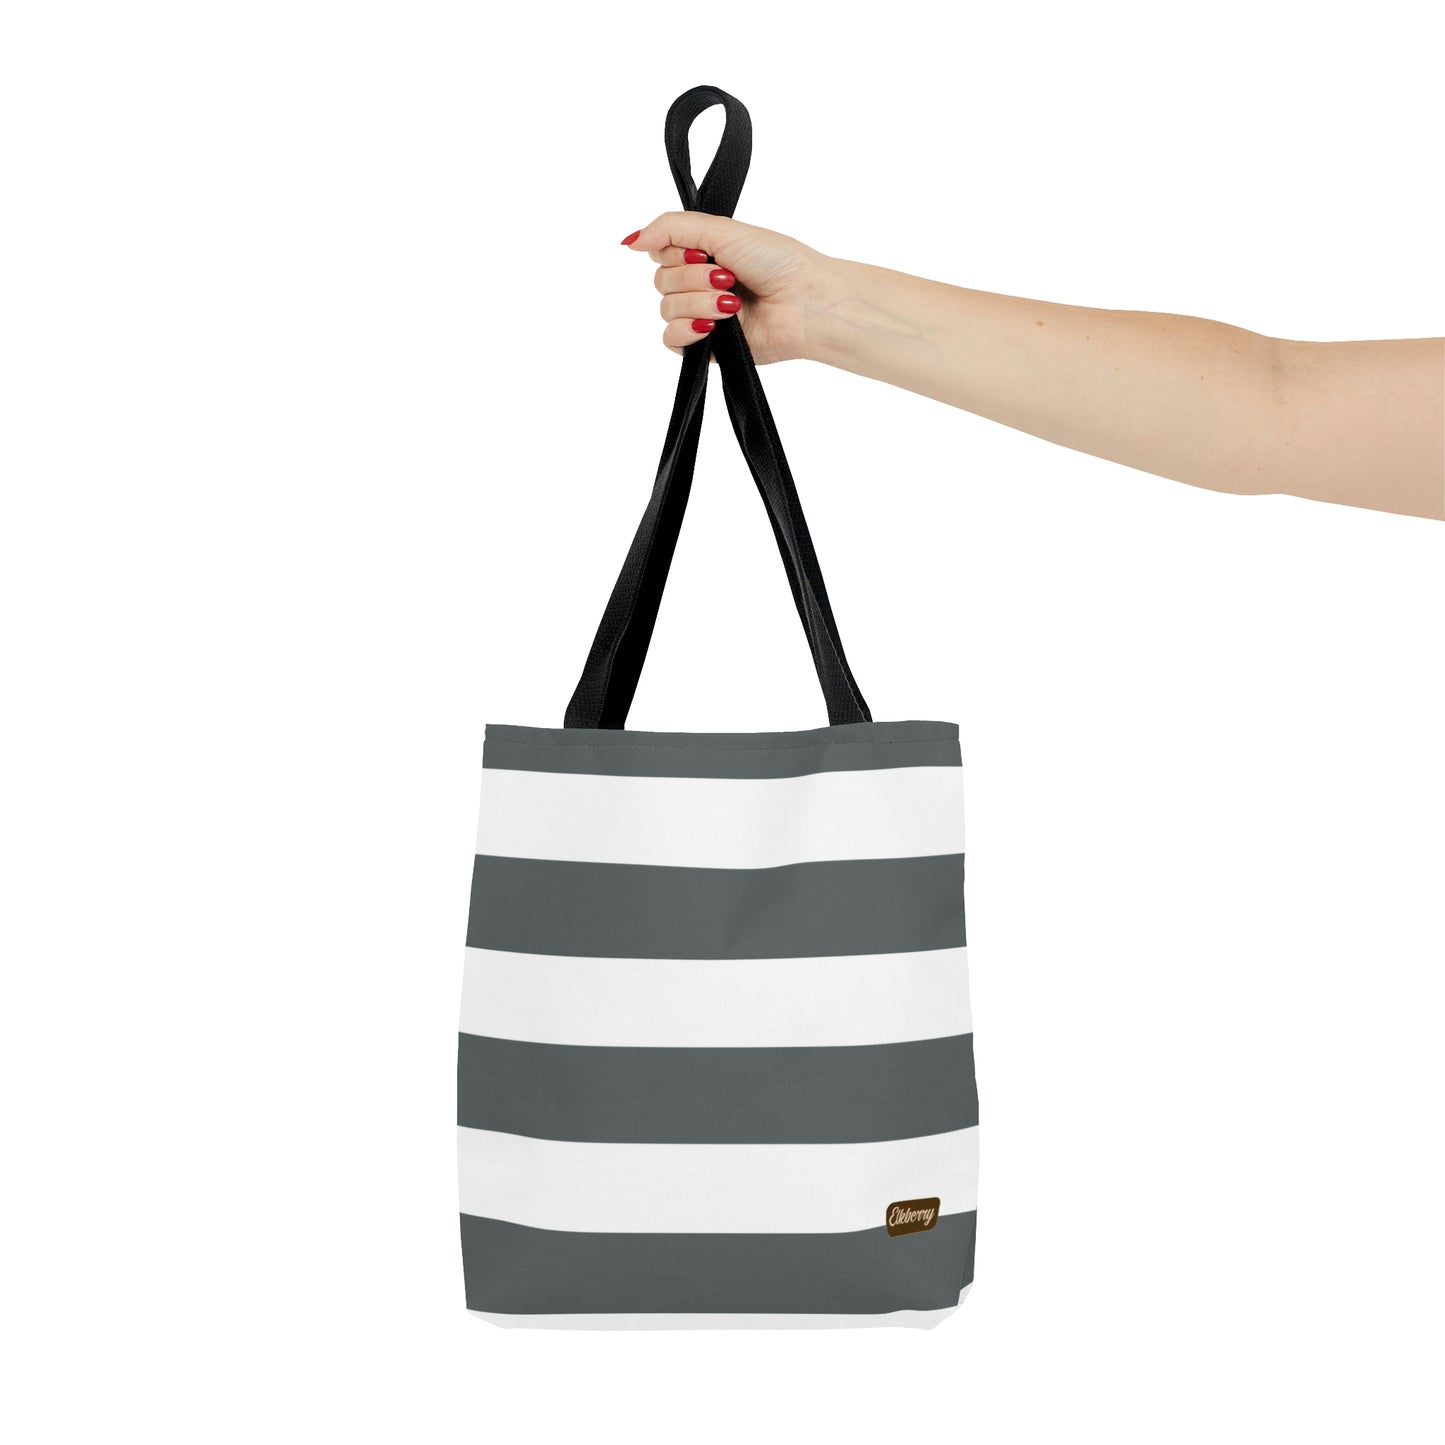 Lightweight Tote Bag - Charcoal Gray/White Stripes